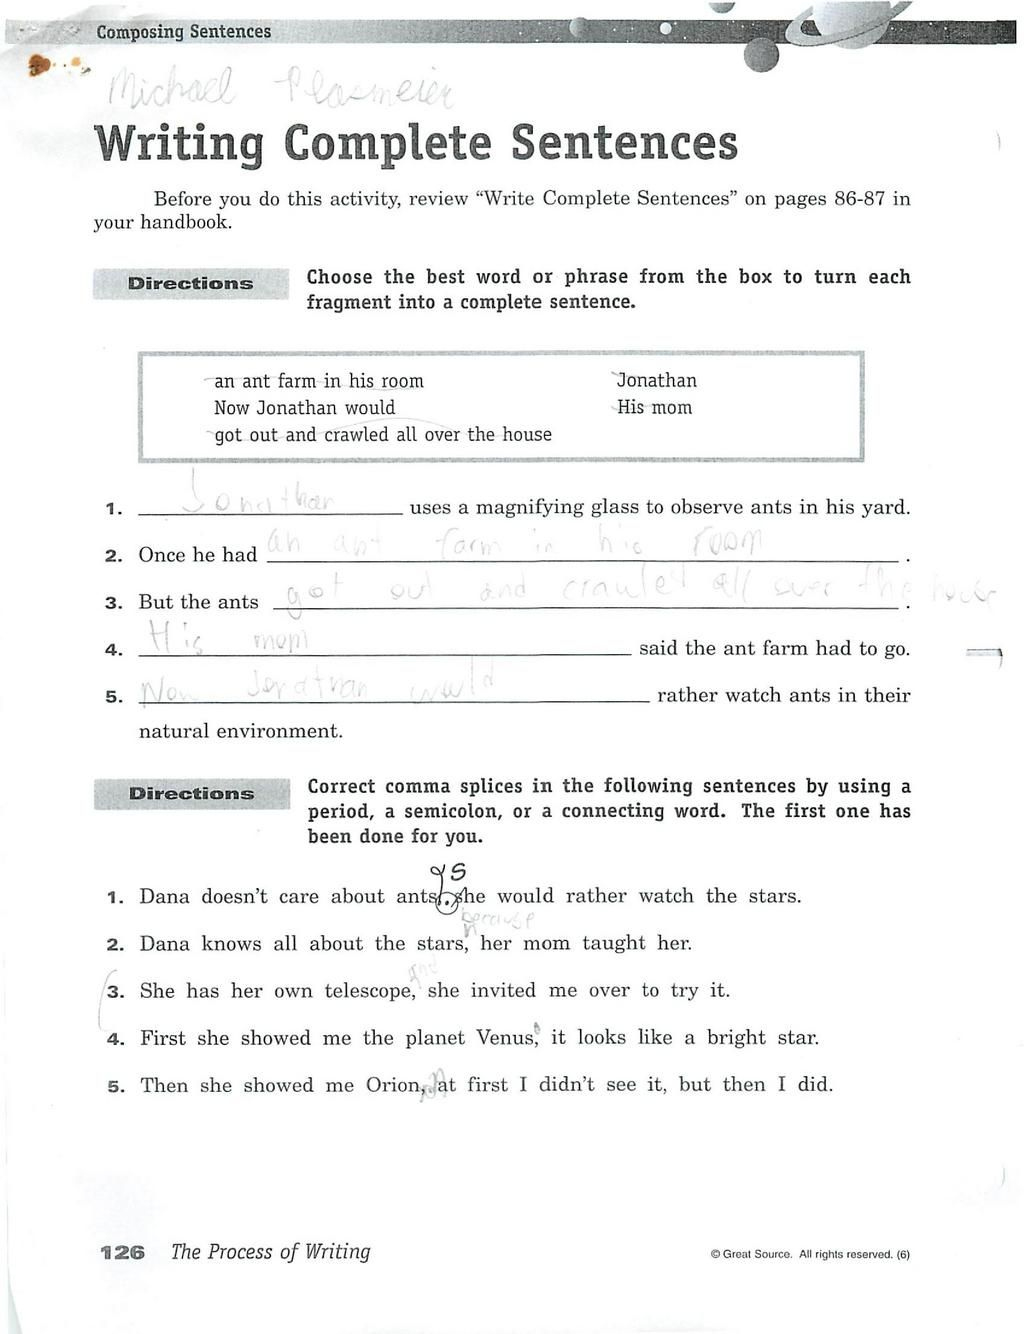 Free Grammar Worksheets 6Th Grade Pinterest - Saferbrowser Yahoo pertaining to 6Th Grade Writing Worksheets Printable Free